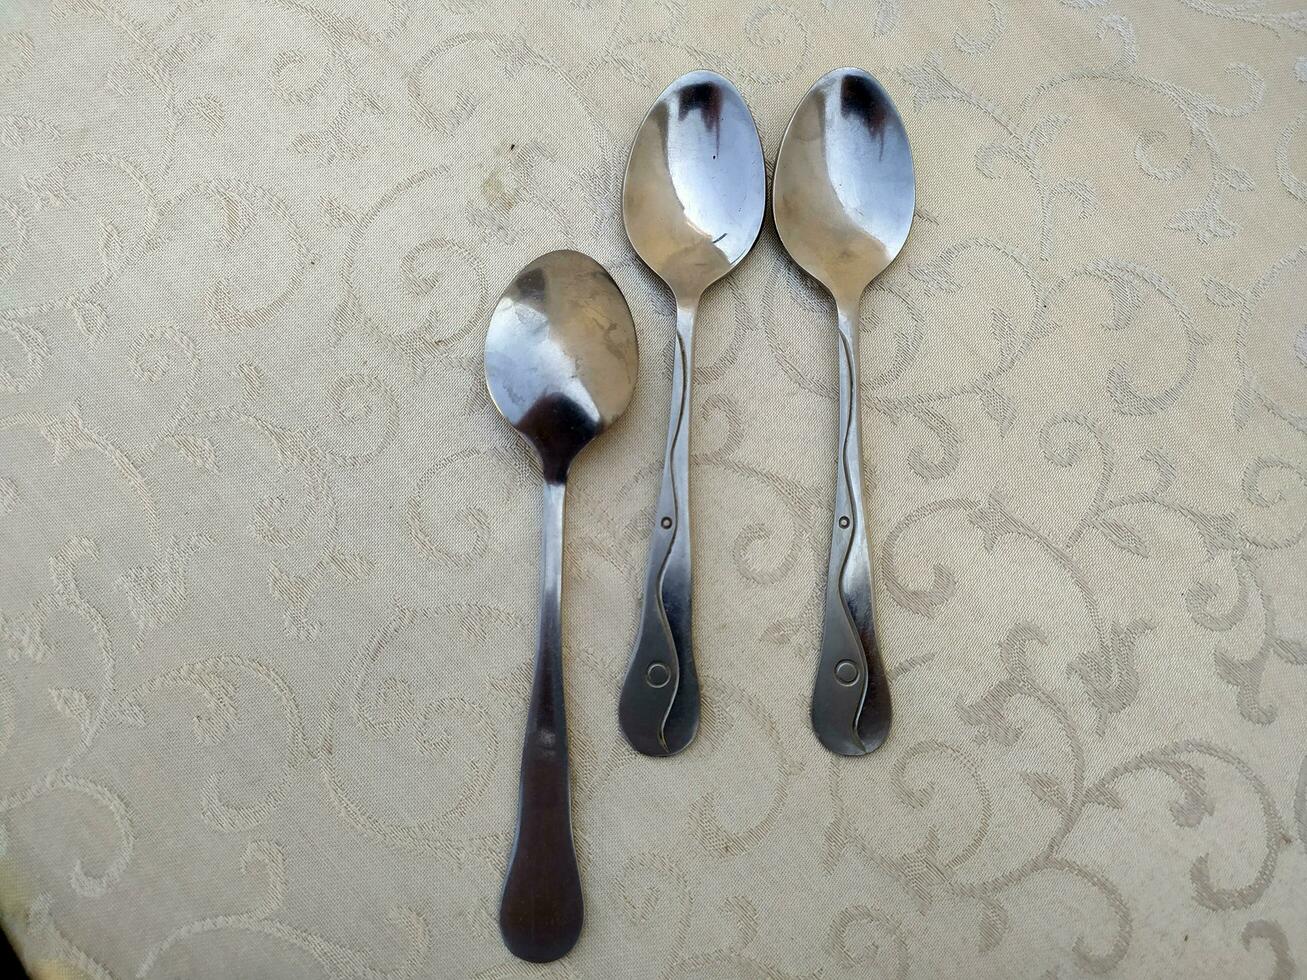 several aluminum spoons arranged uniquely on the table photo